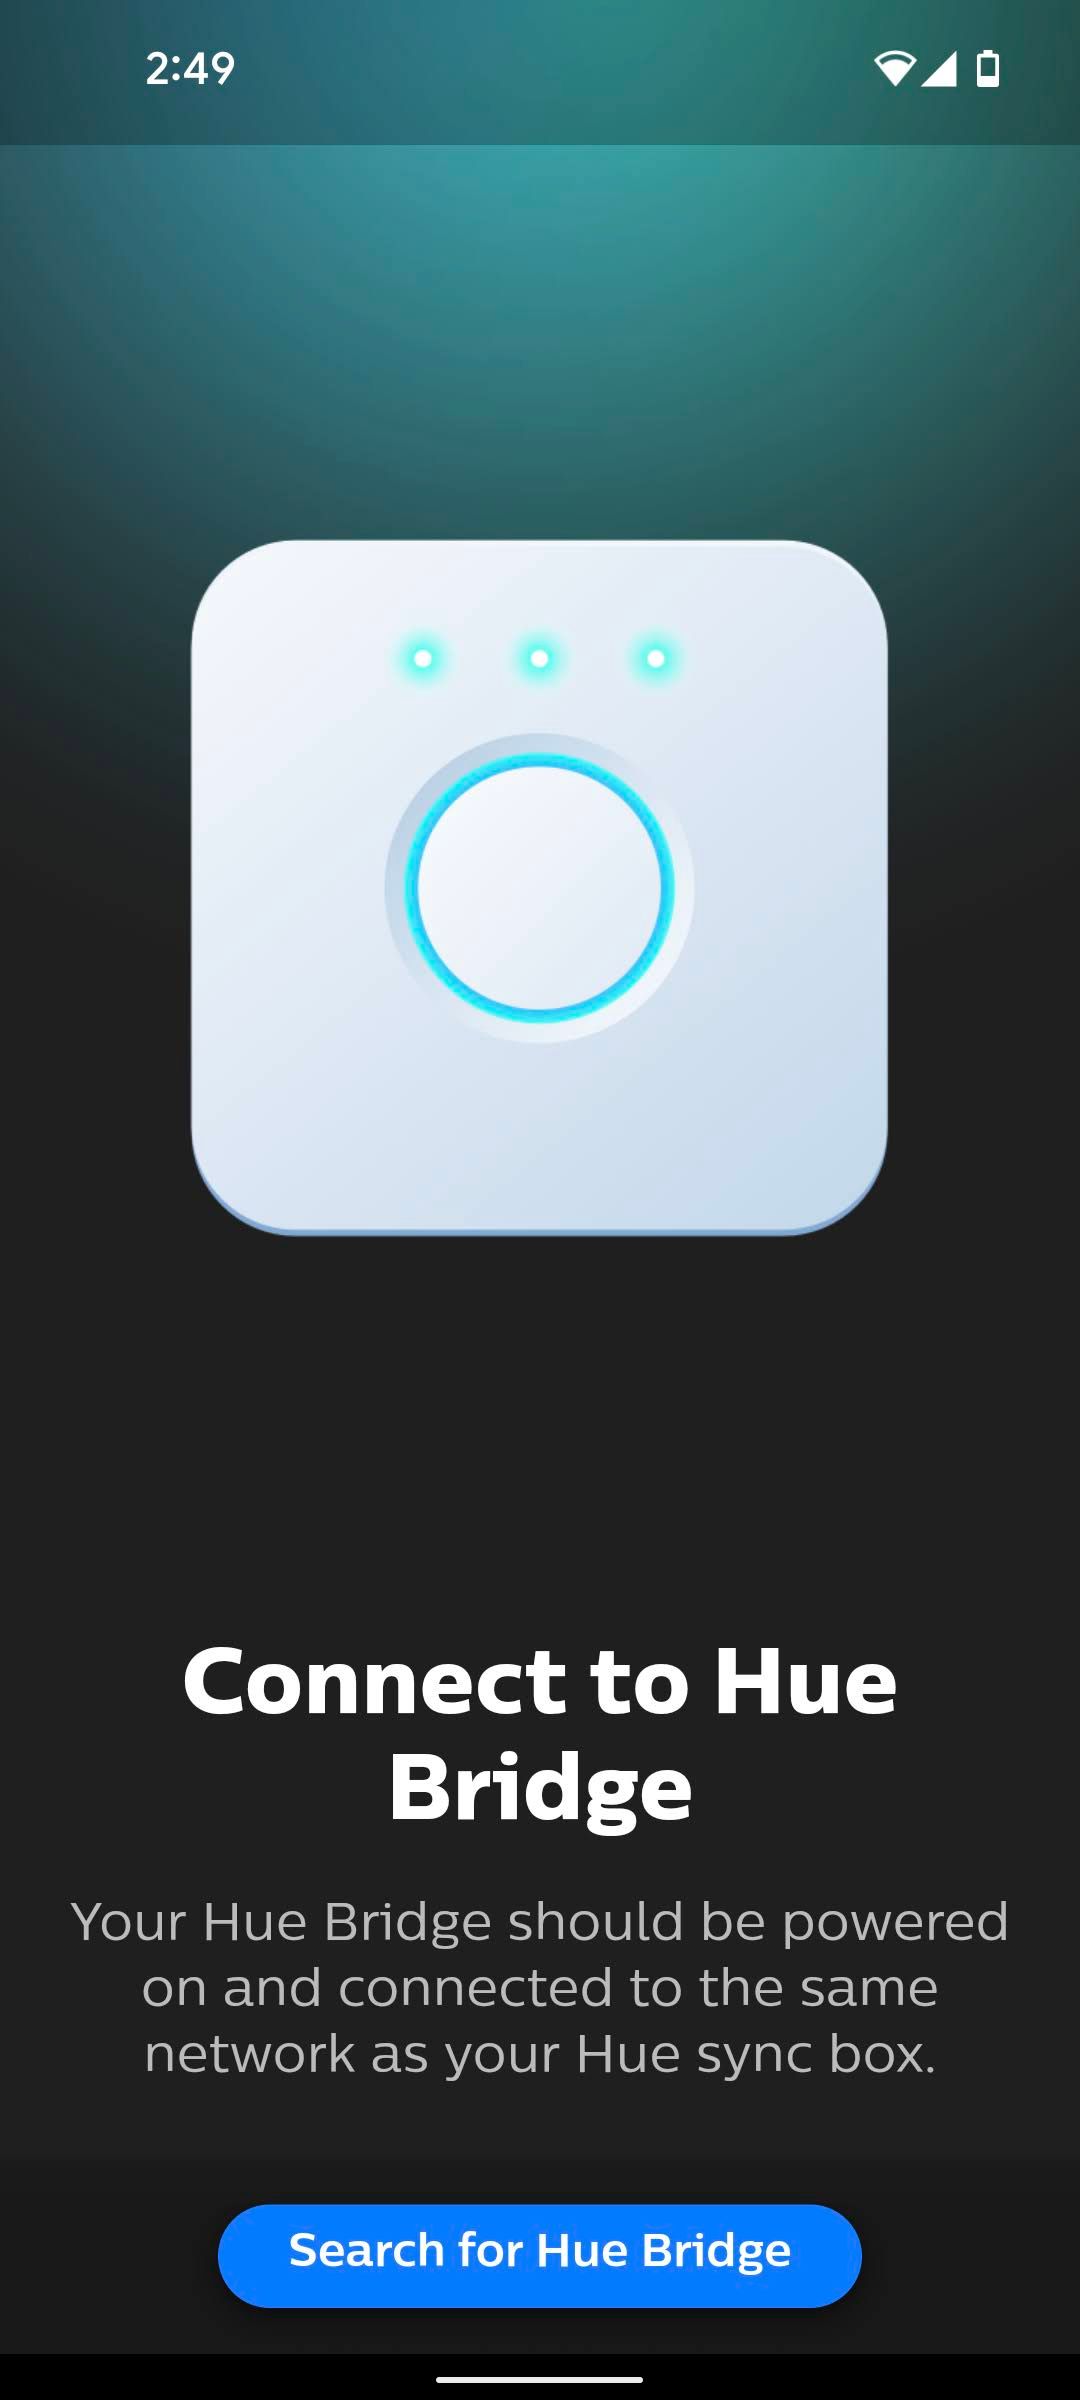 The Search for Hue Bridge page in the Philips Hue Sync app